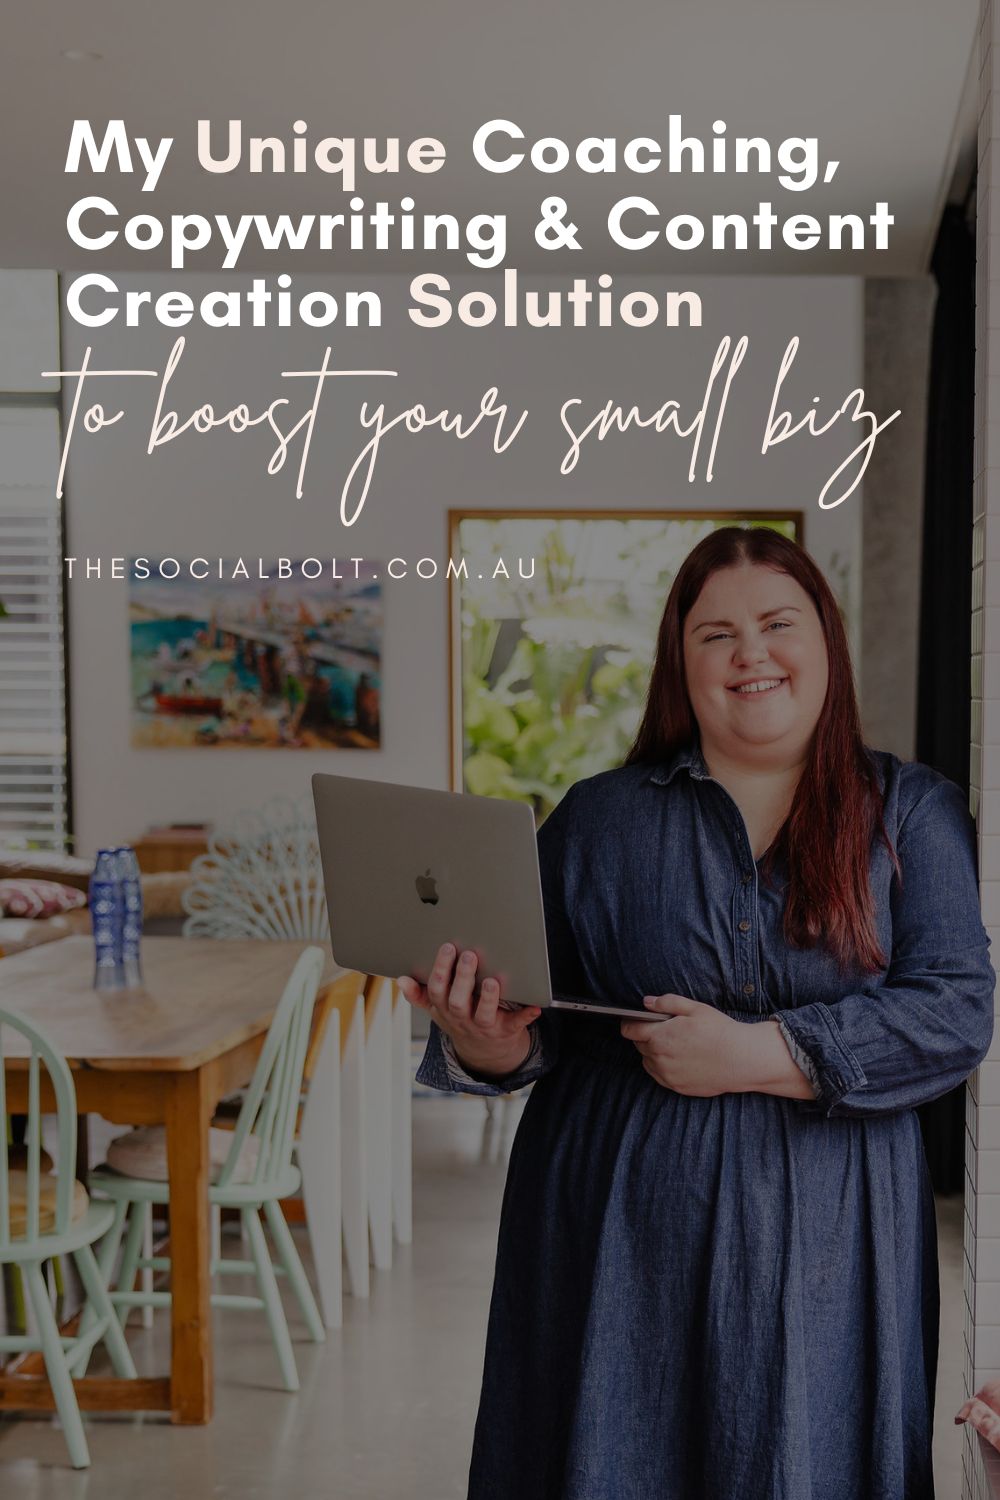 My Unique Coaching, Copywriting & Content Creation Solution to Boost Your Small Business